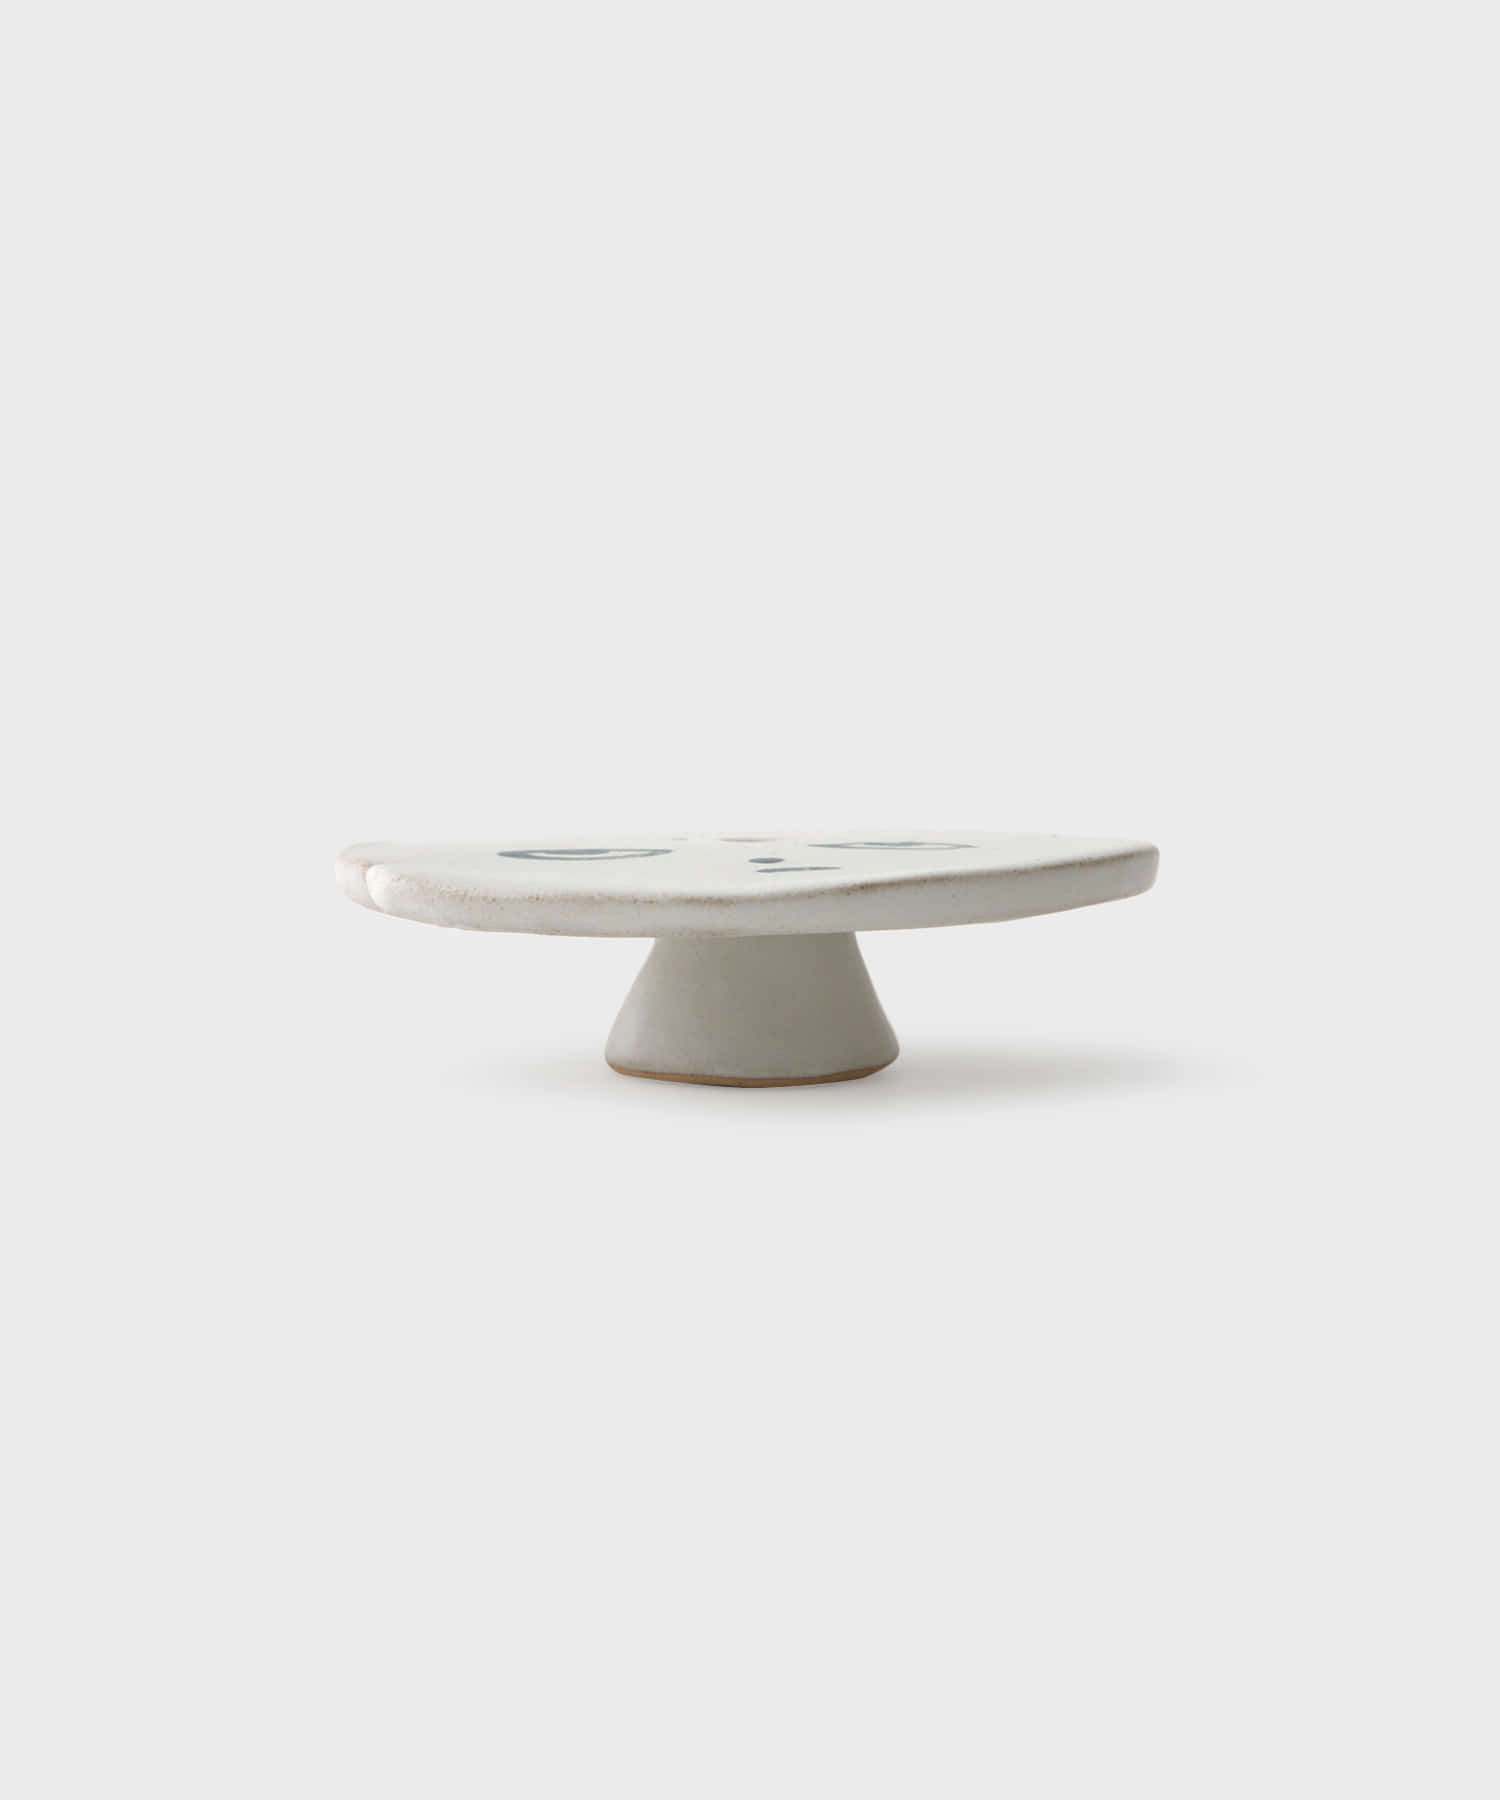 Incense Holder with Conic Base